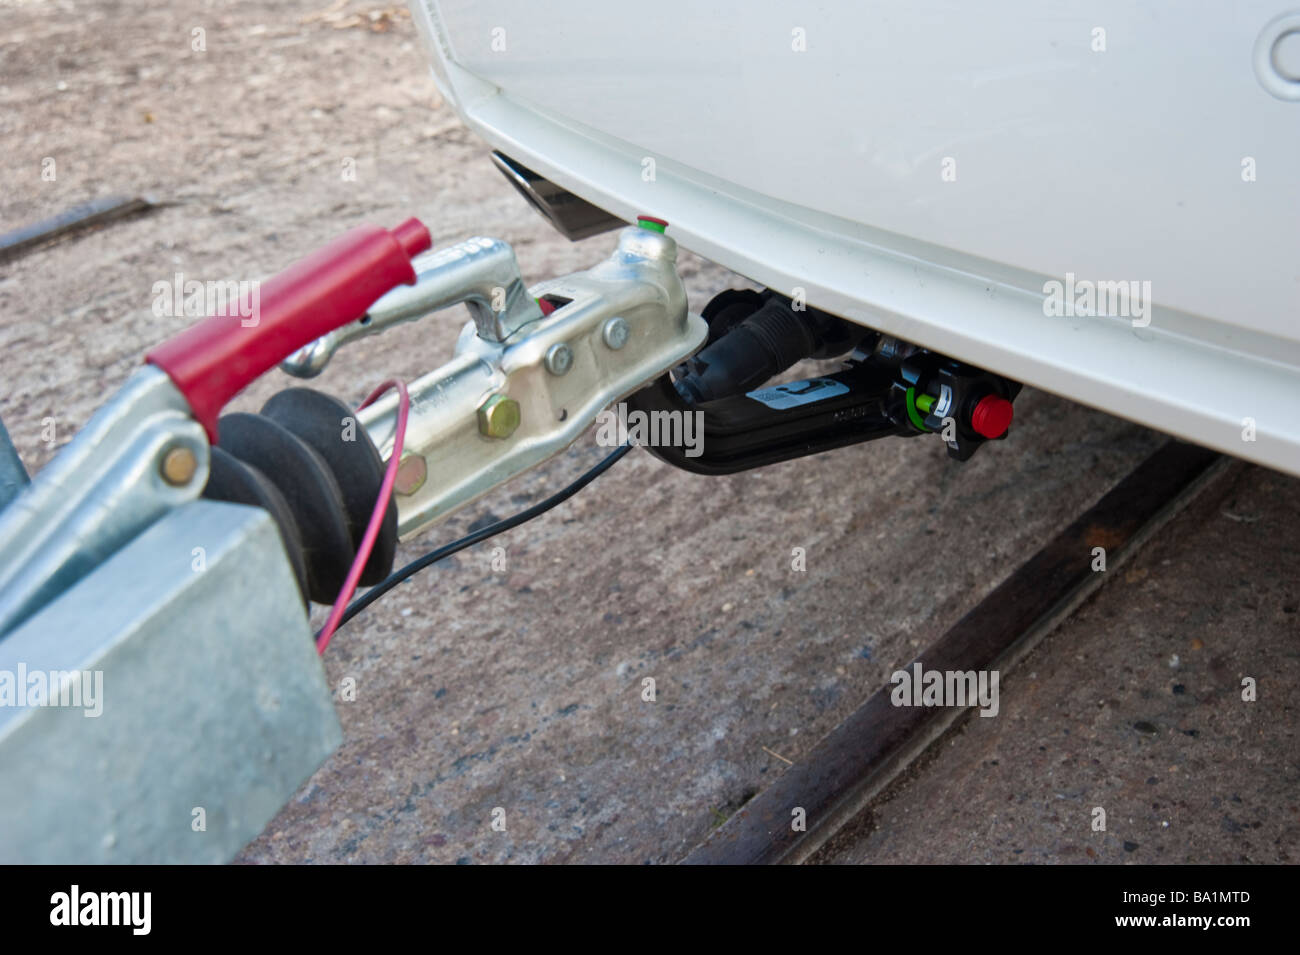 Car or Vehicle Hook Hitch for Trailer Stock Image - Image of vehicle, hook:  52506941